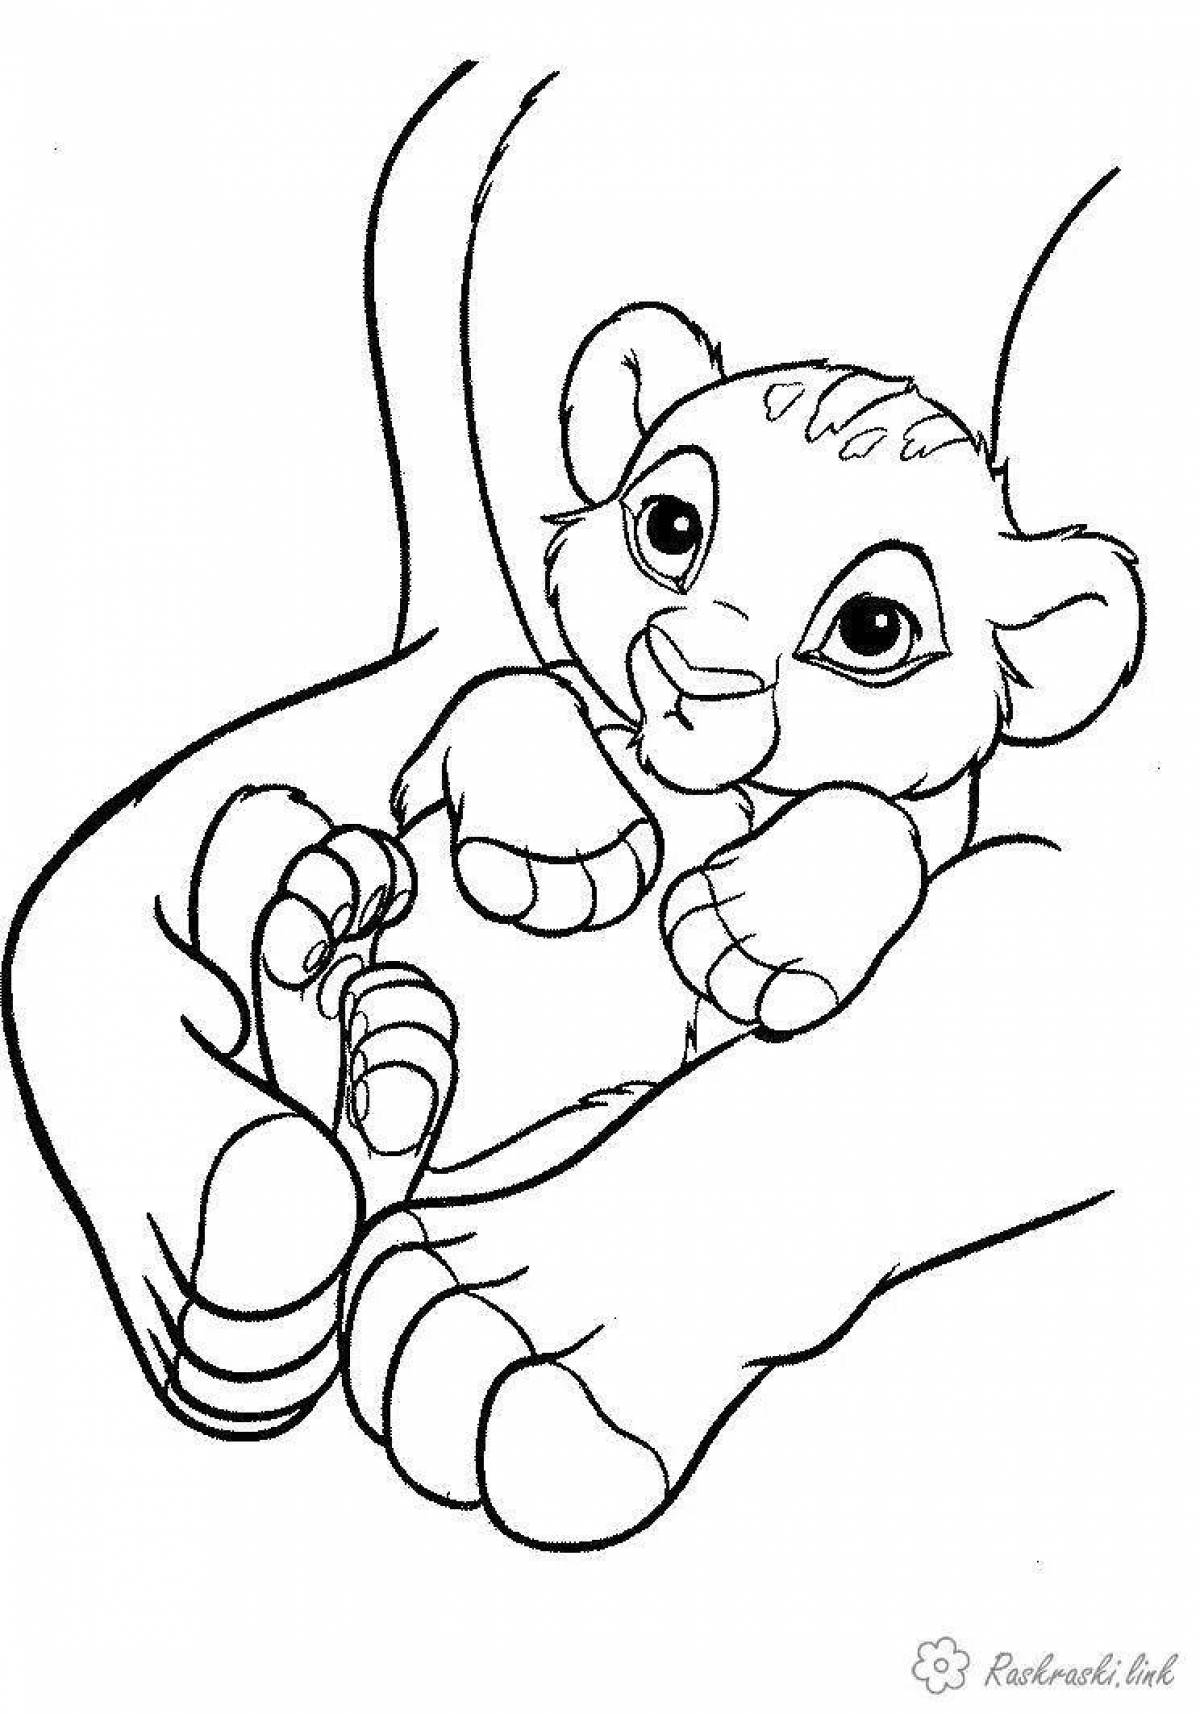 Exciting simba coloring book for kids